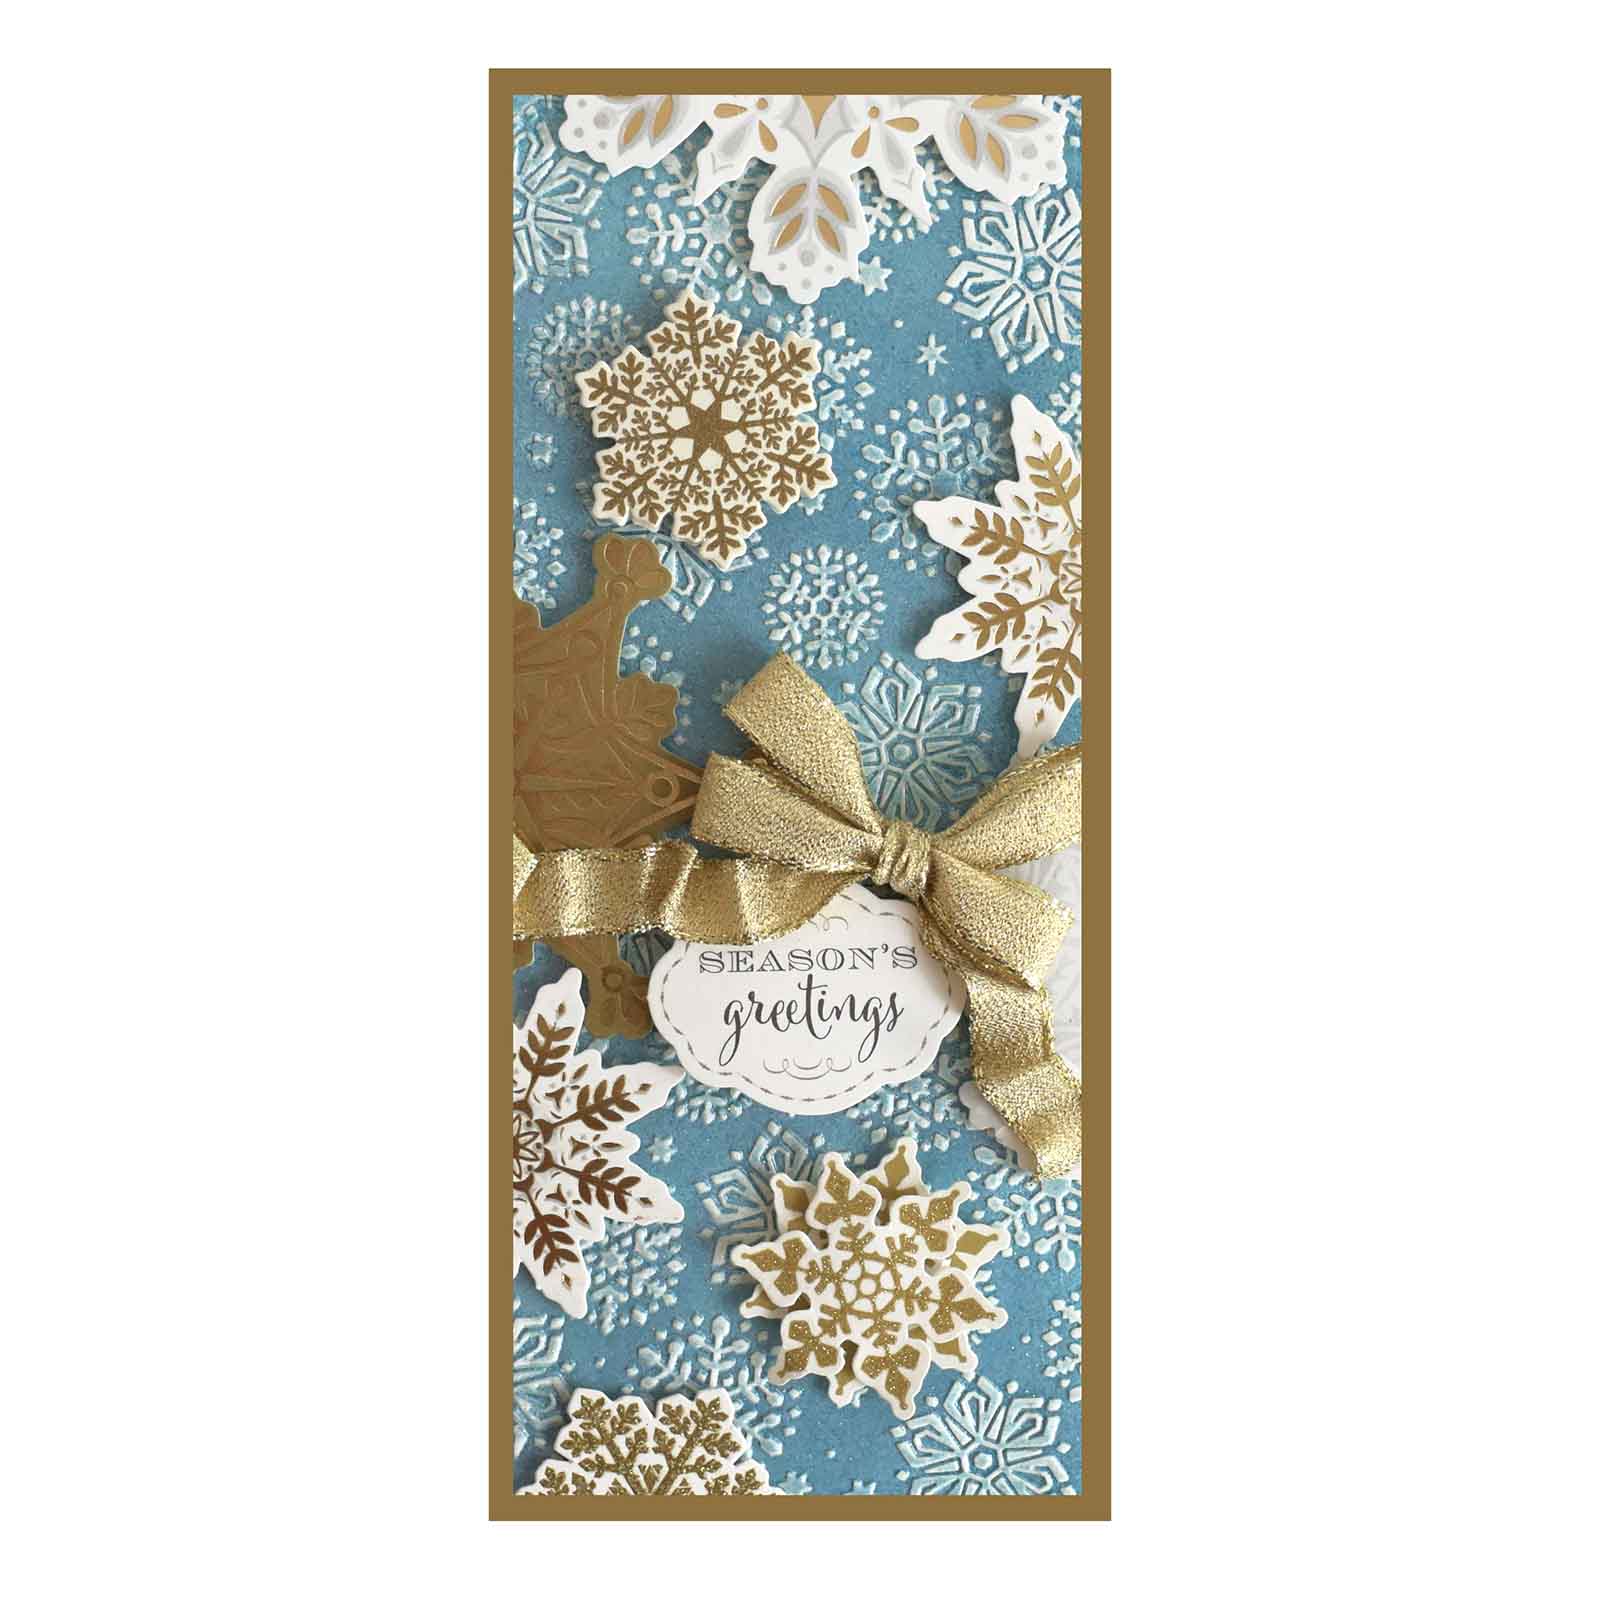 a card with a bow and snowflakes on it.